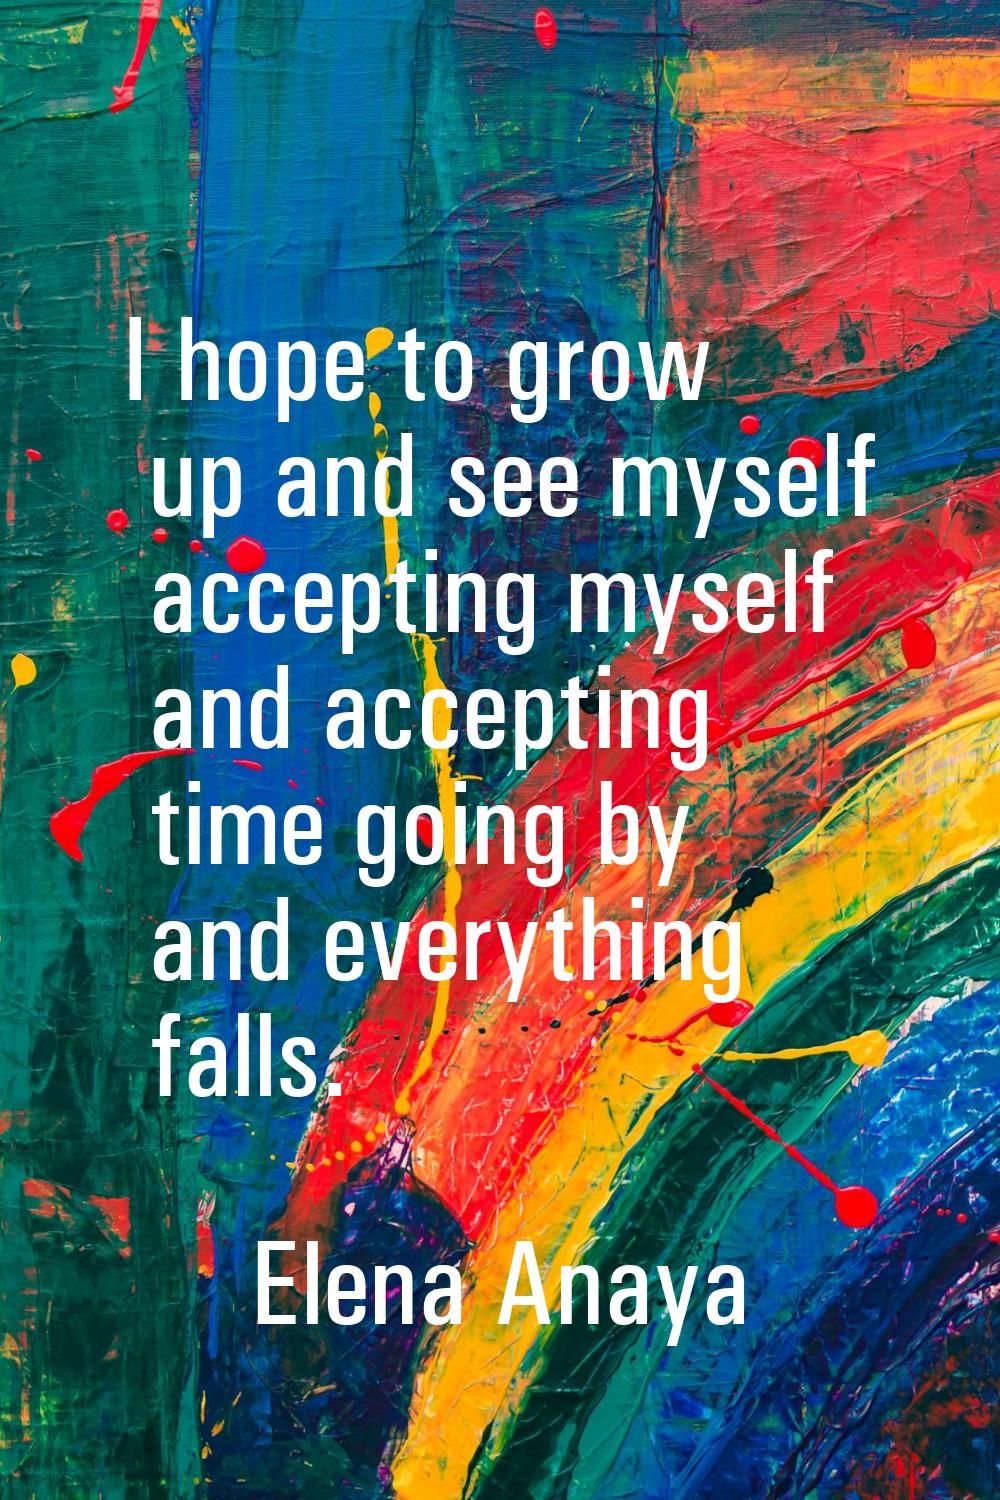 I hope to grow up and see myself accepting myself and accepting time going by and everything falls.